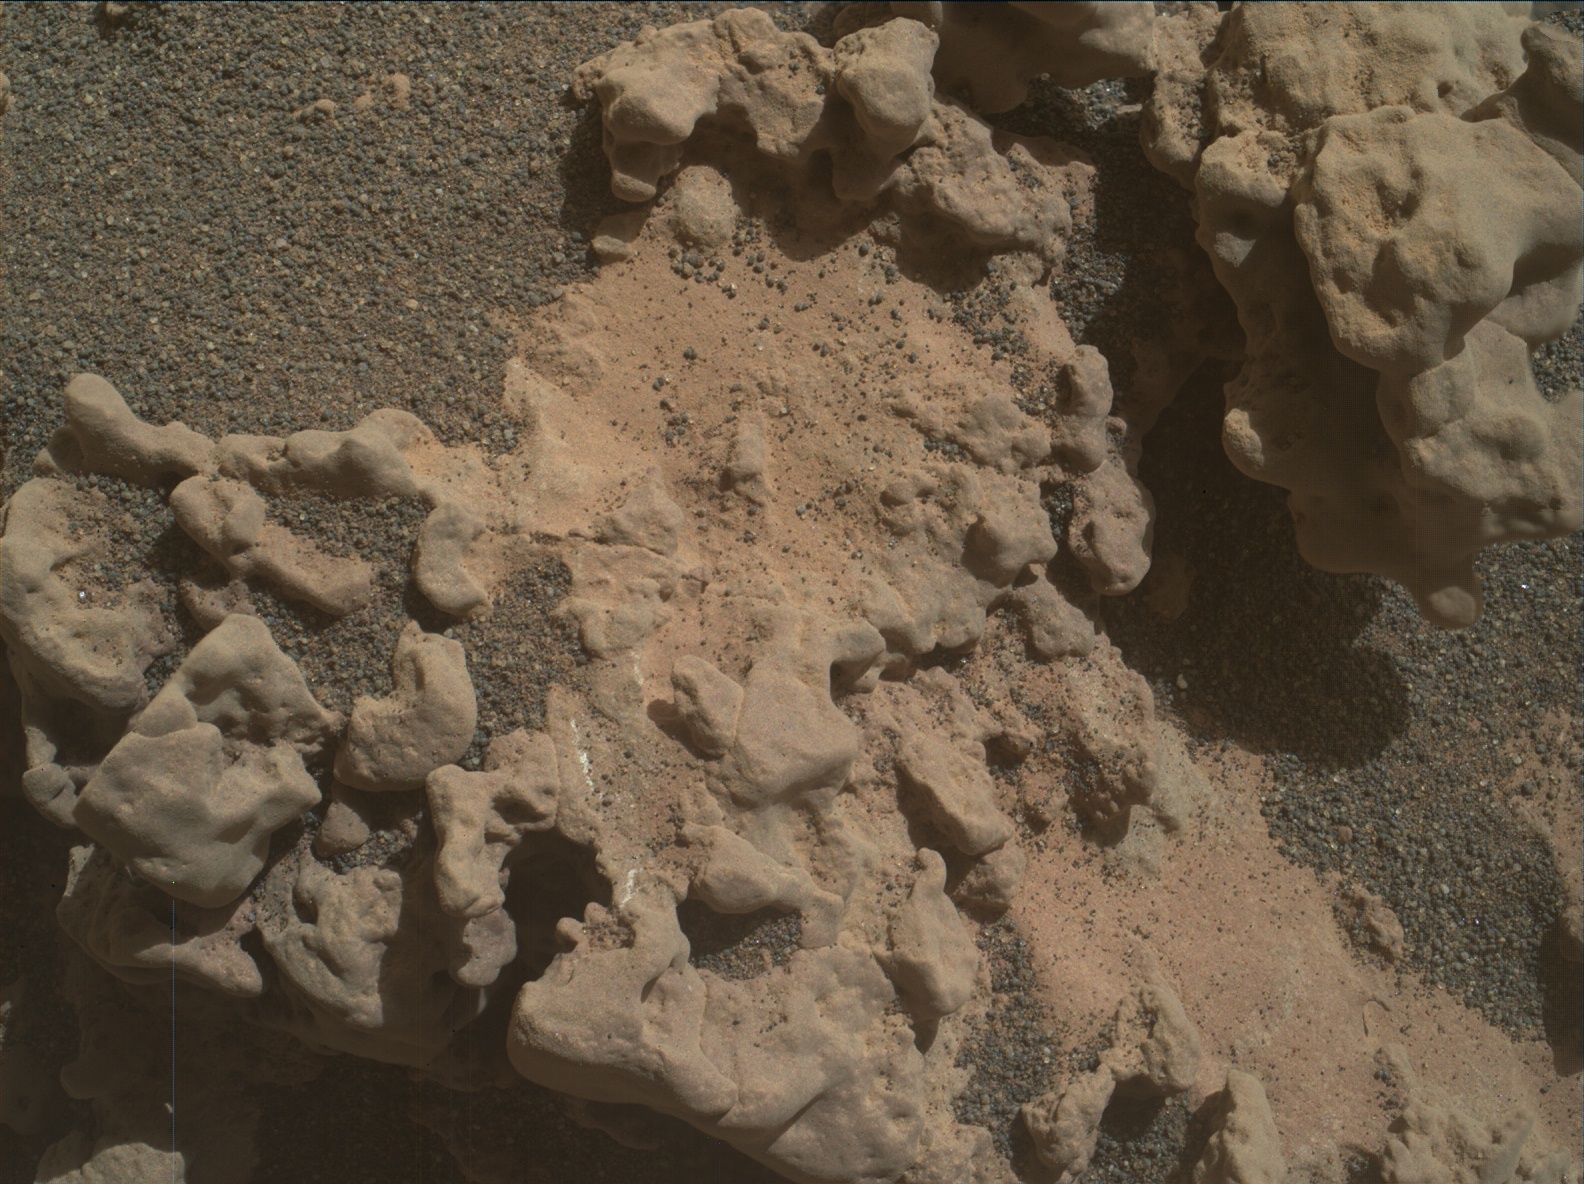 Nasa's Mars rover Curiosity acquired this image using its Mars Hand Lens Imager (MAHLI) on Sol 3161